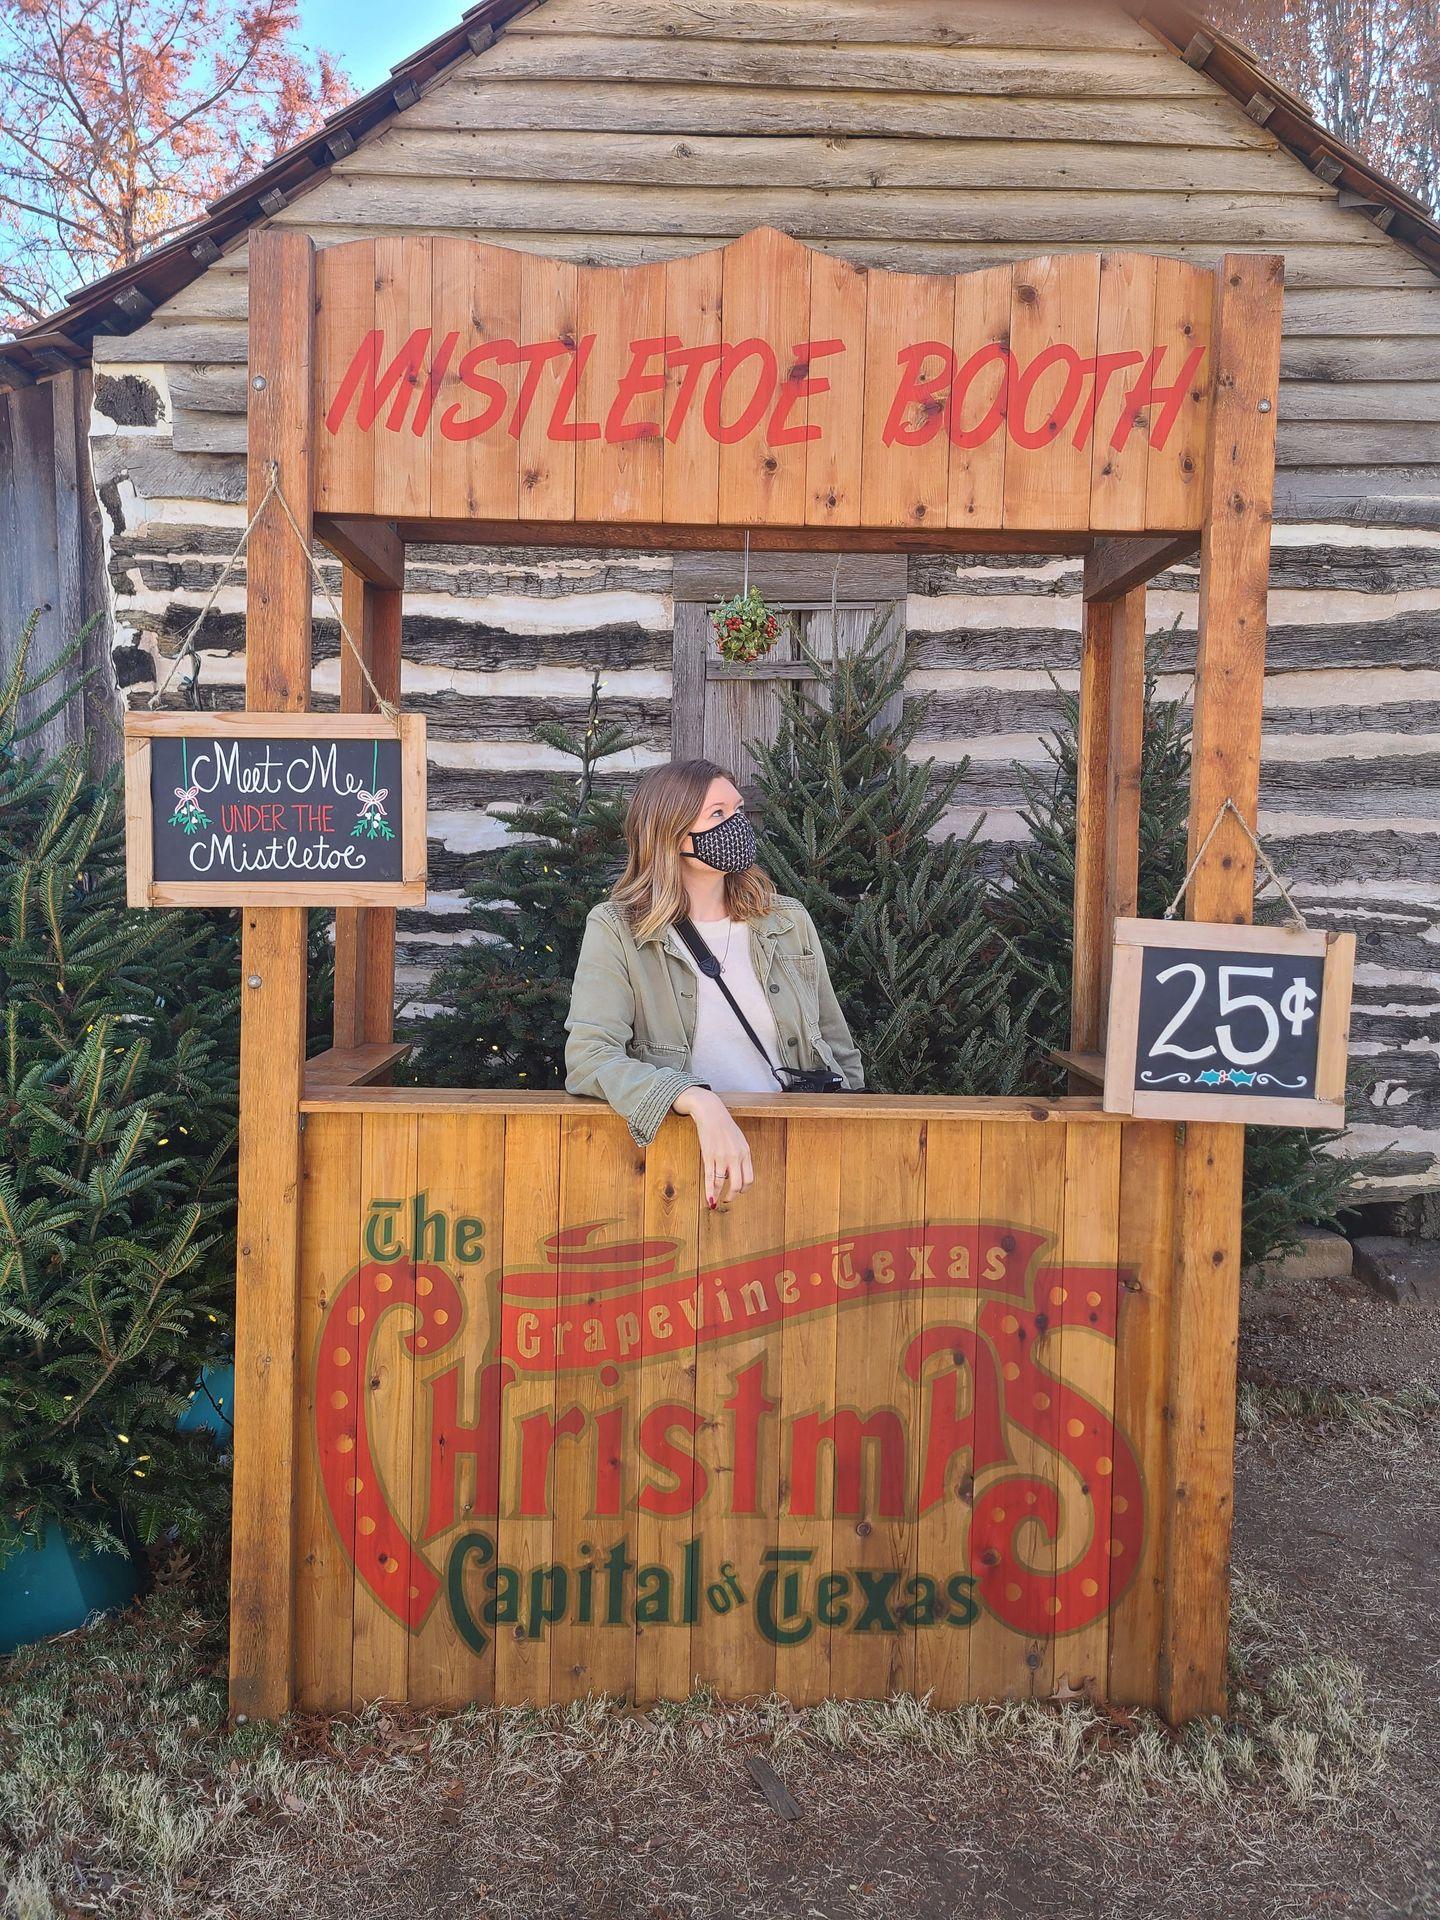 Lydia standing in a booth labeled "Mistletoe Booth" with a 25 cents price tag.